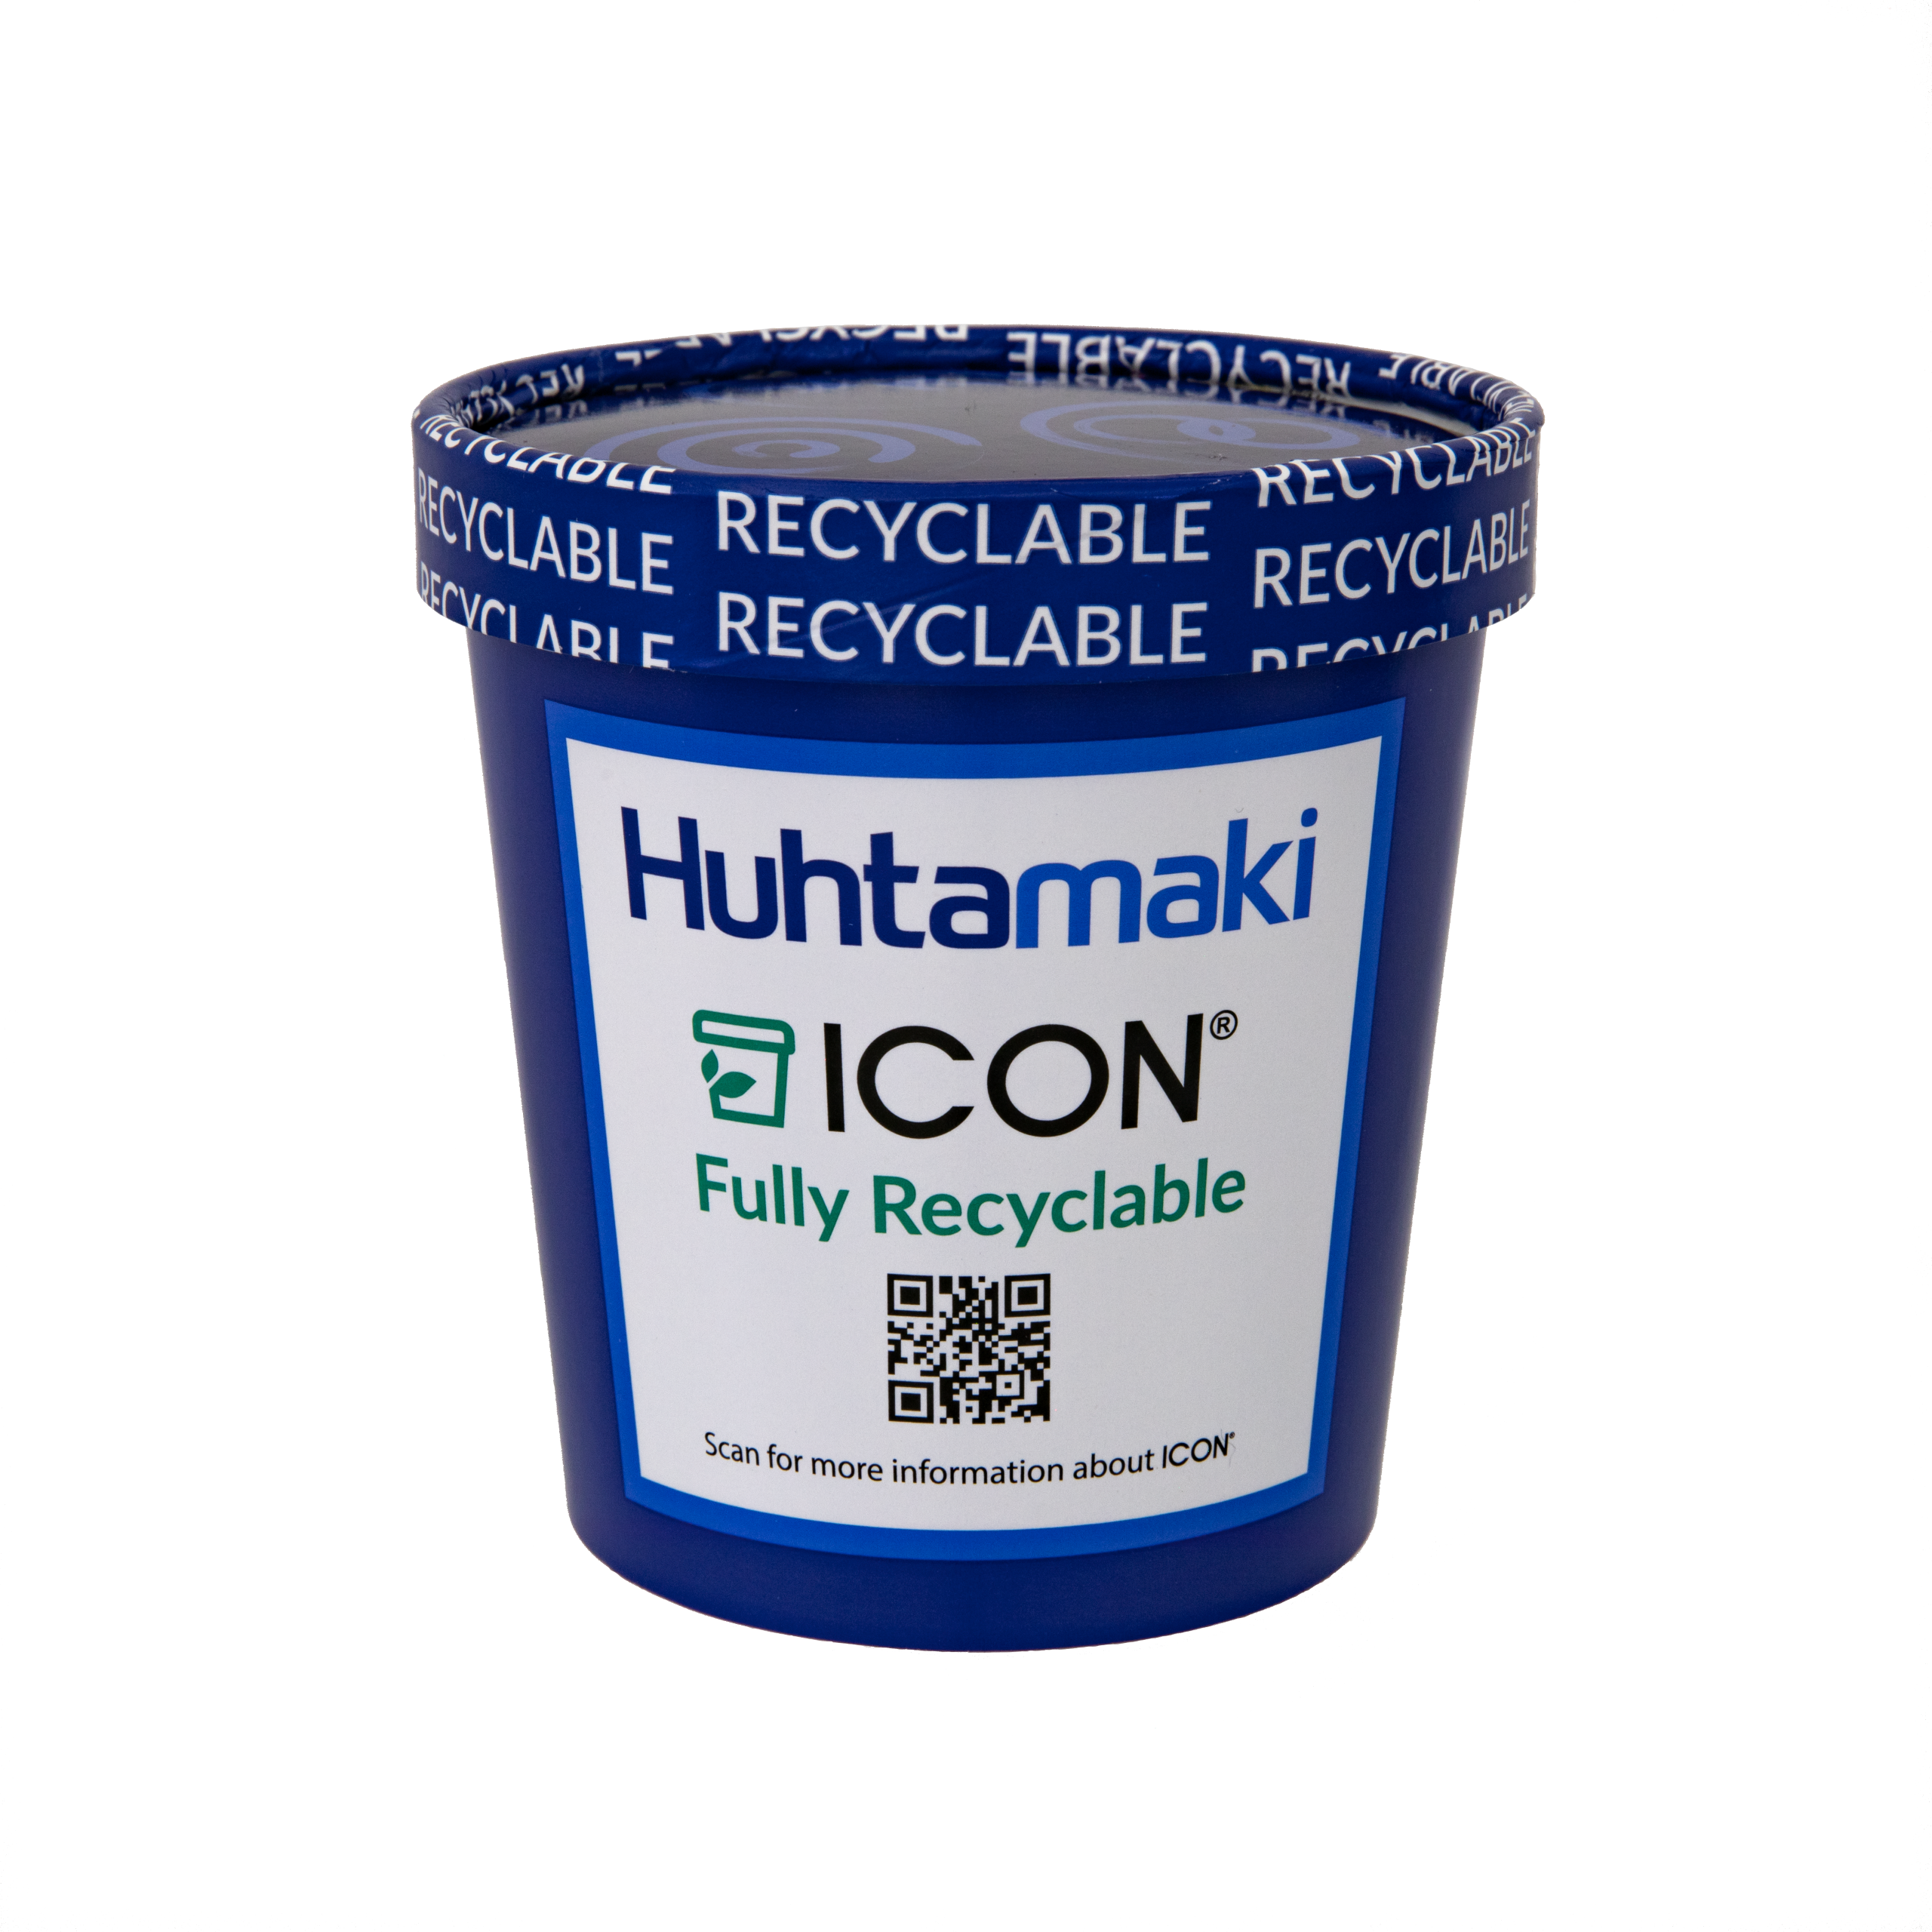 Huhtamaki launches innovative, recyclable ice cream packaging solution in the US, made with 95% renewable biobased material